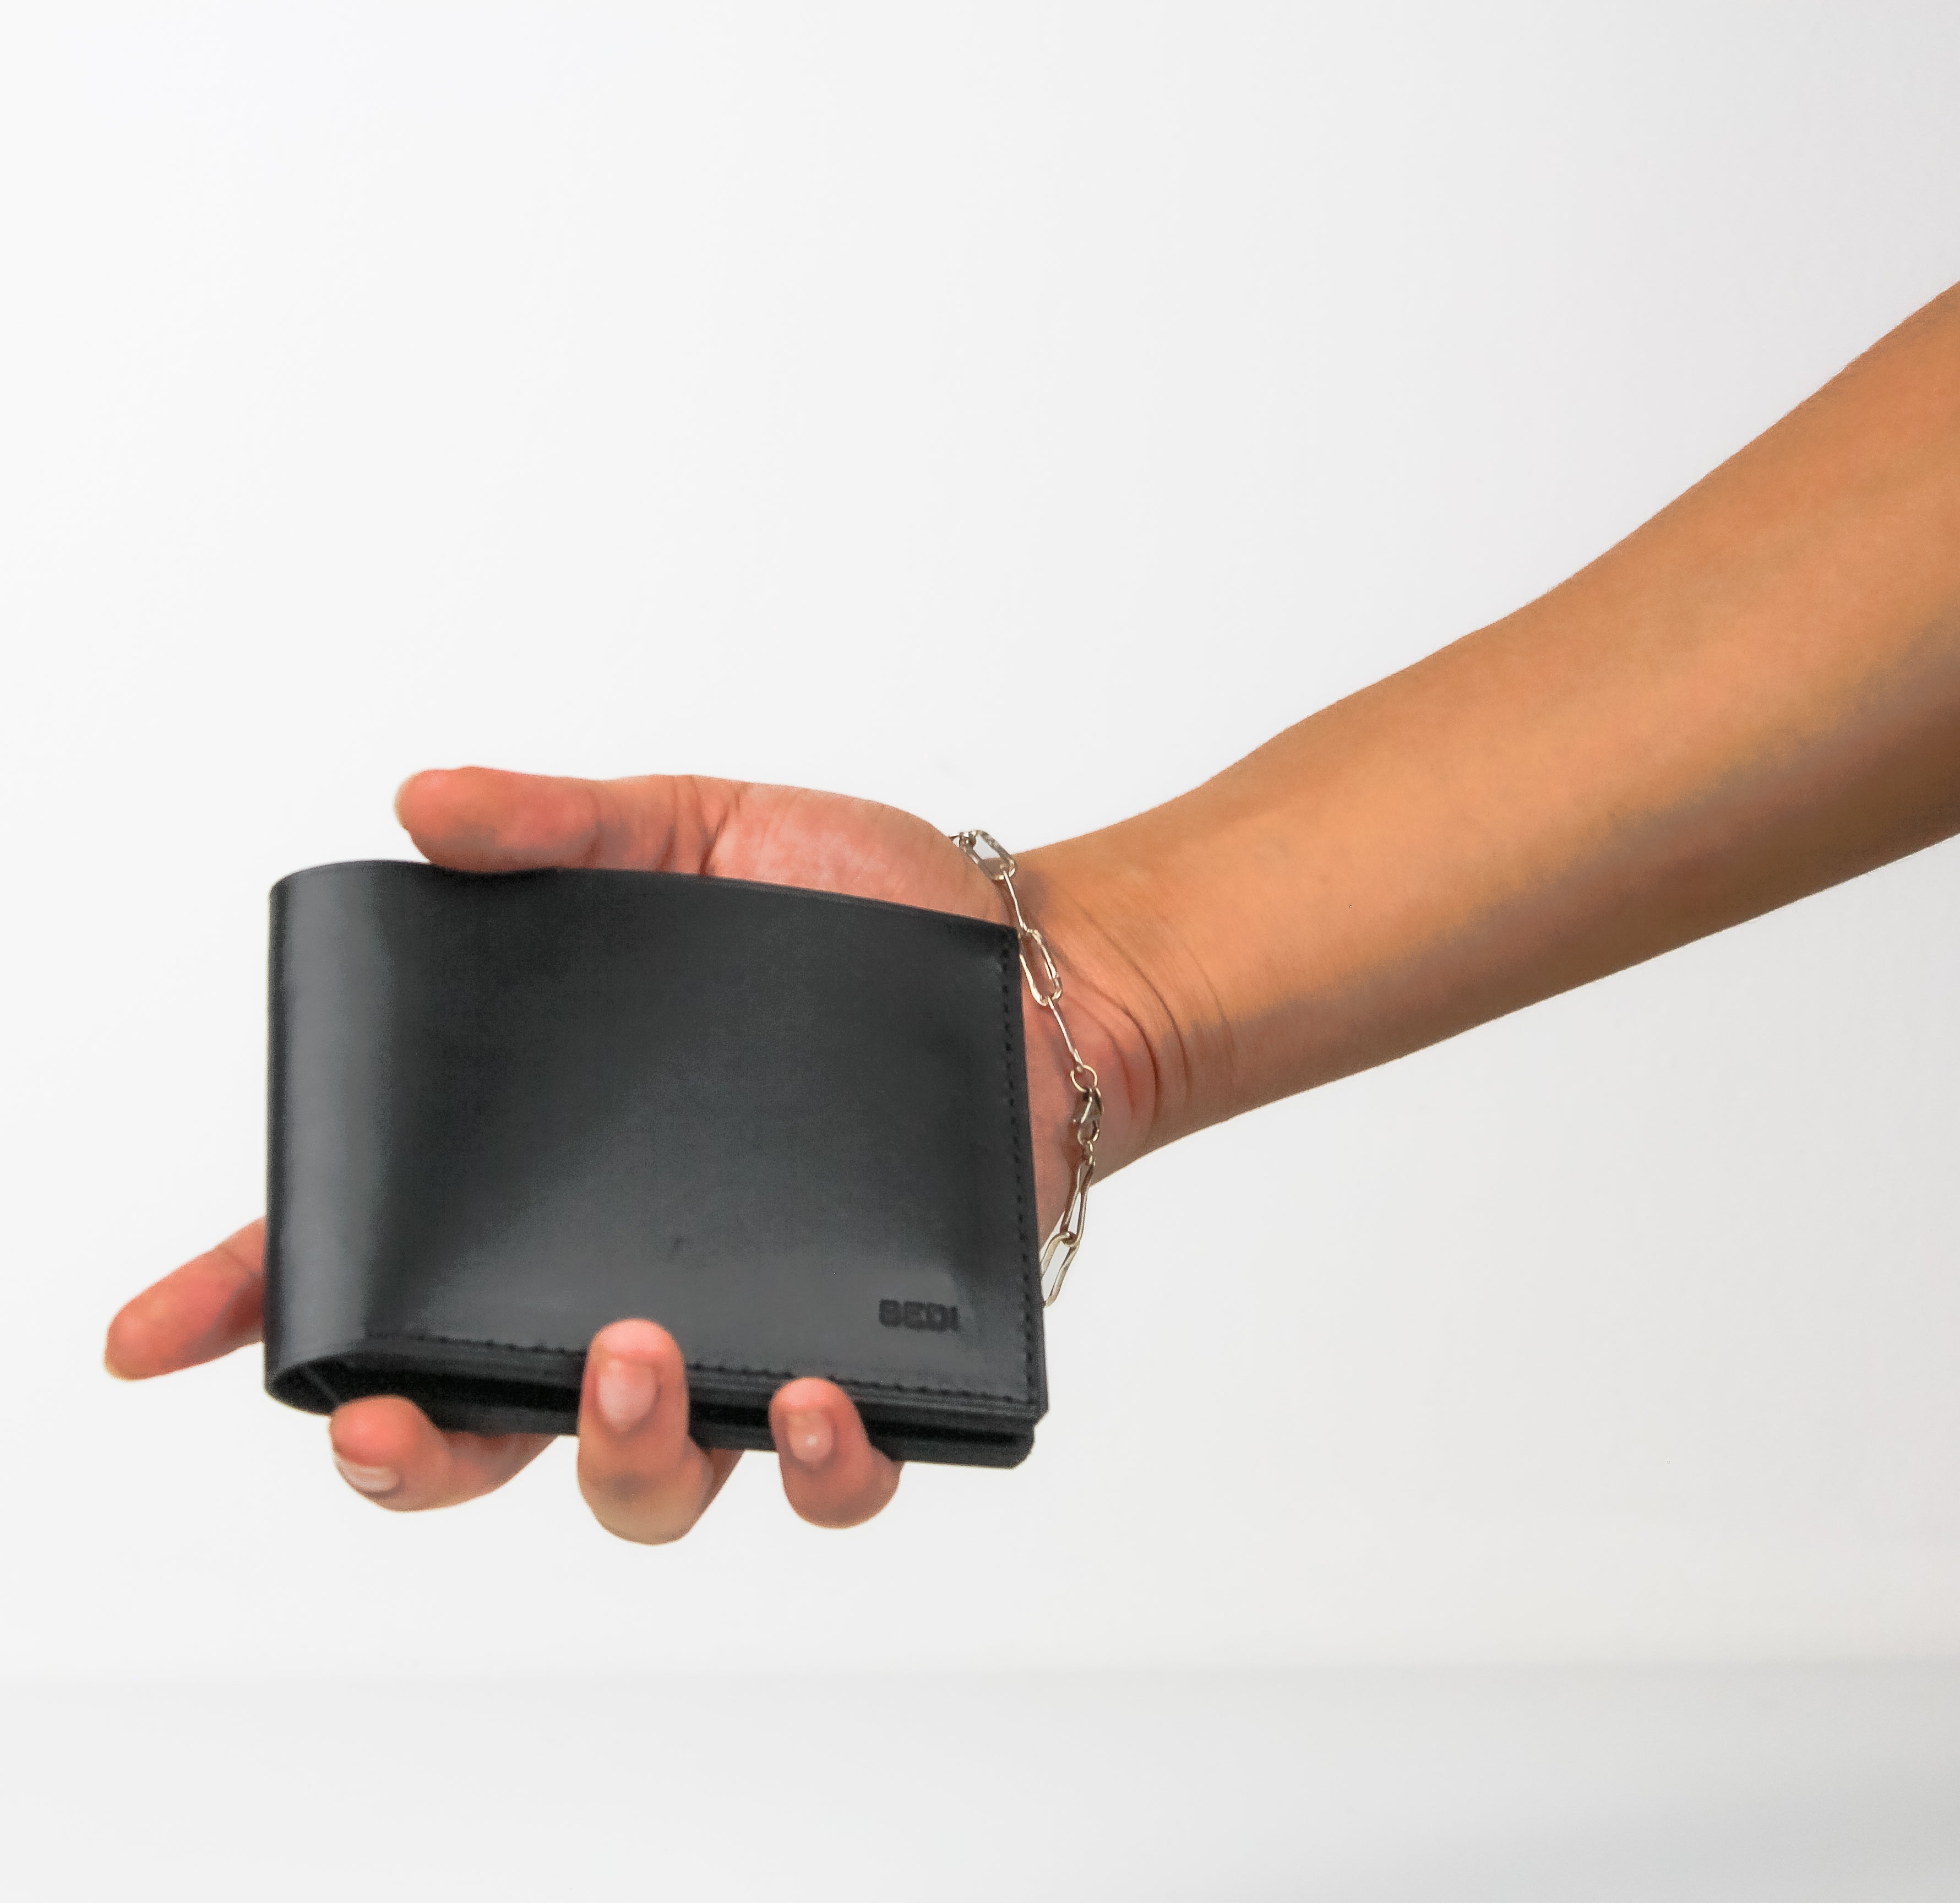 Black leather wallet held in a woman's hand, with a white background